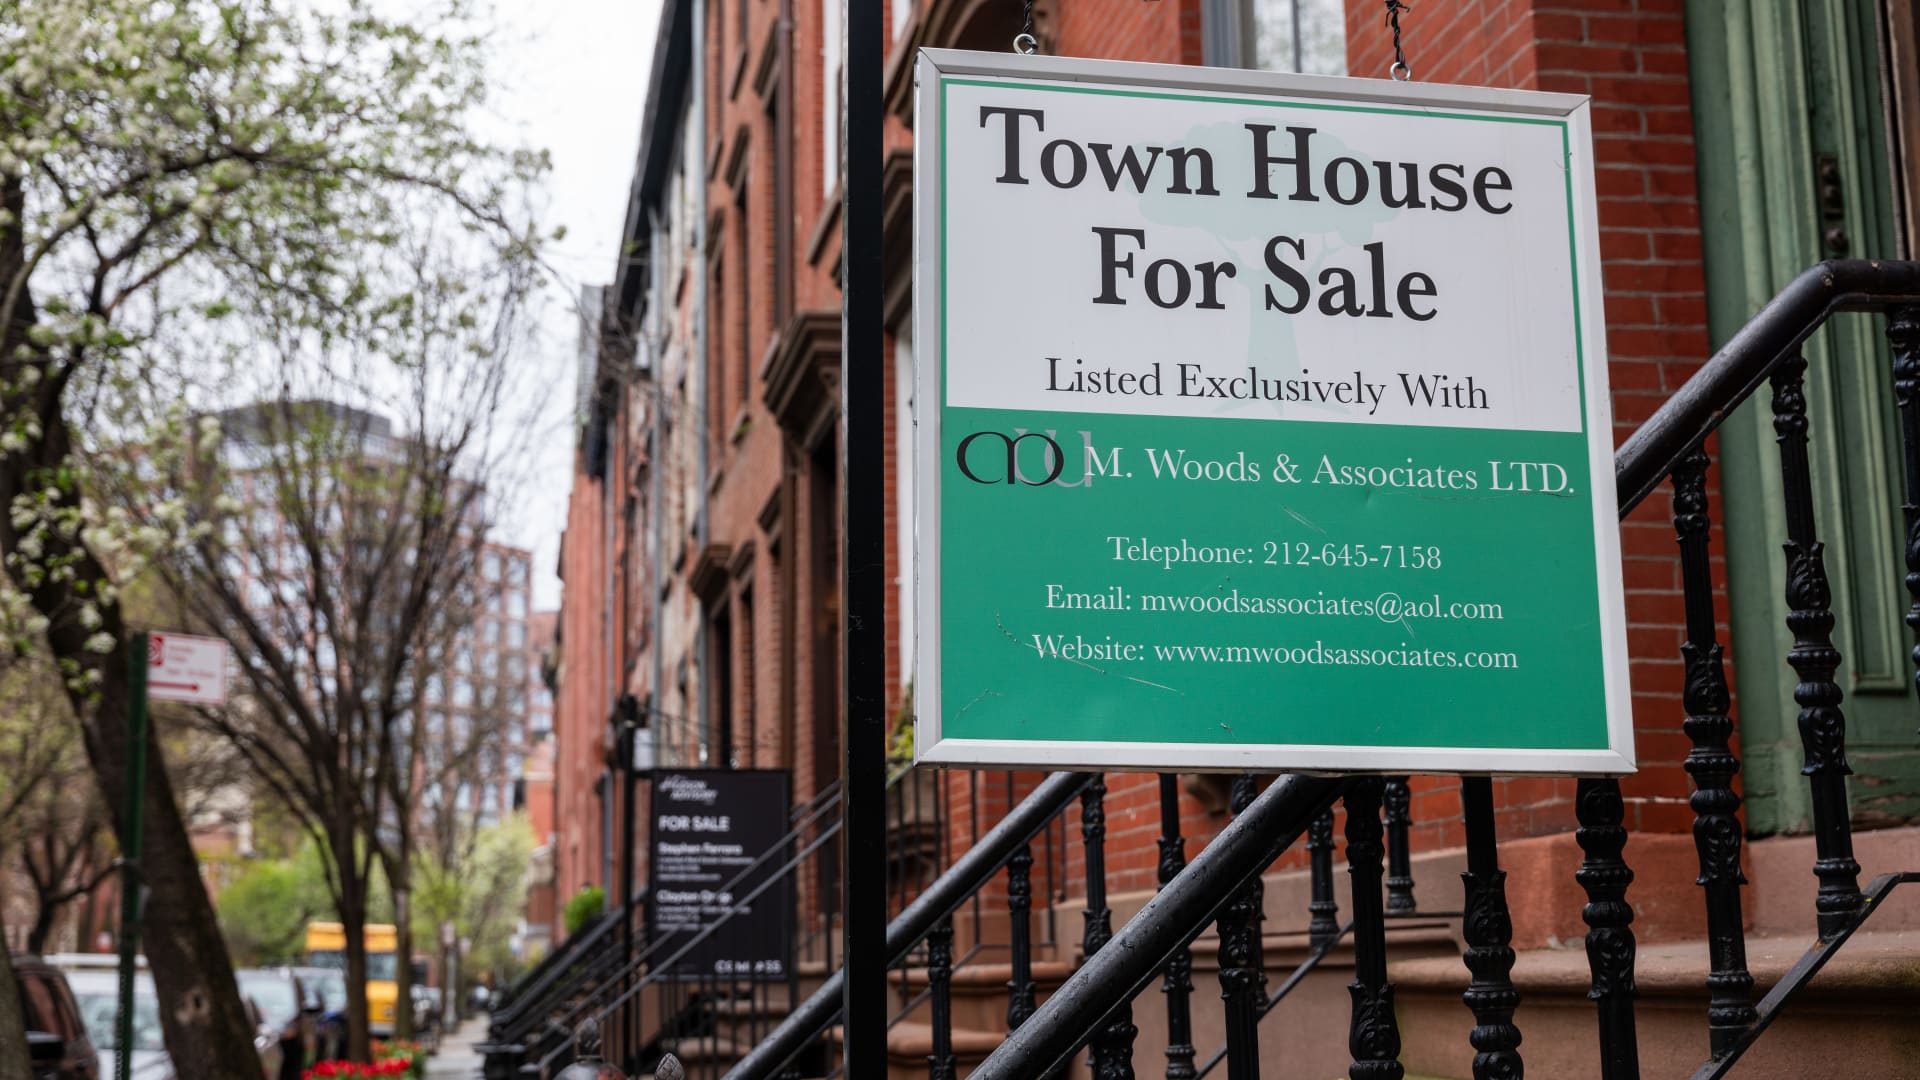 Renters’ hopes of being able to buy a home have fallen to a record low, New York Fed survey shows